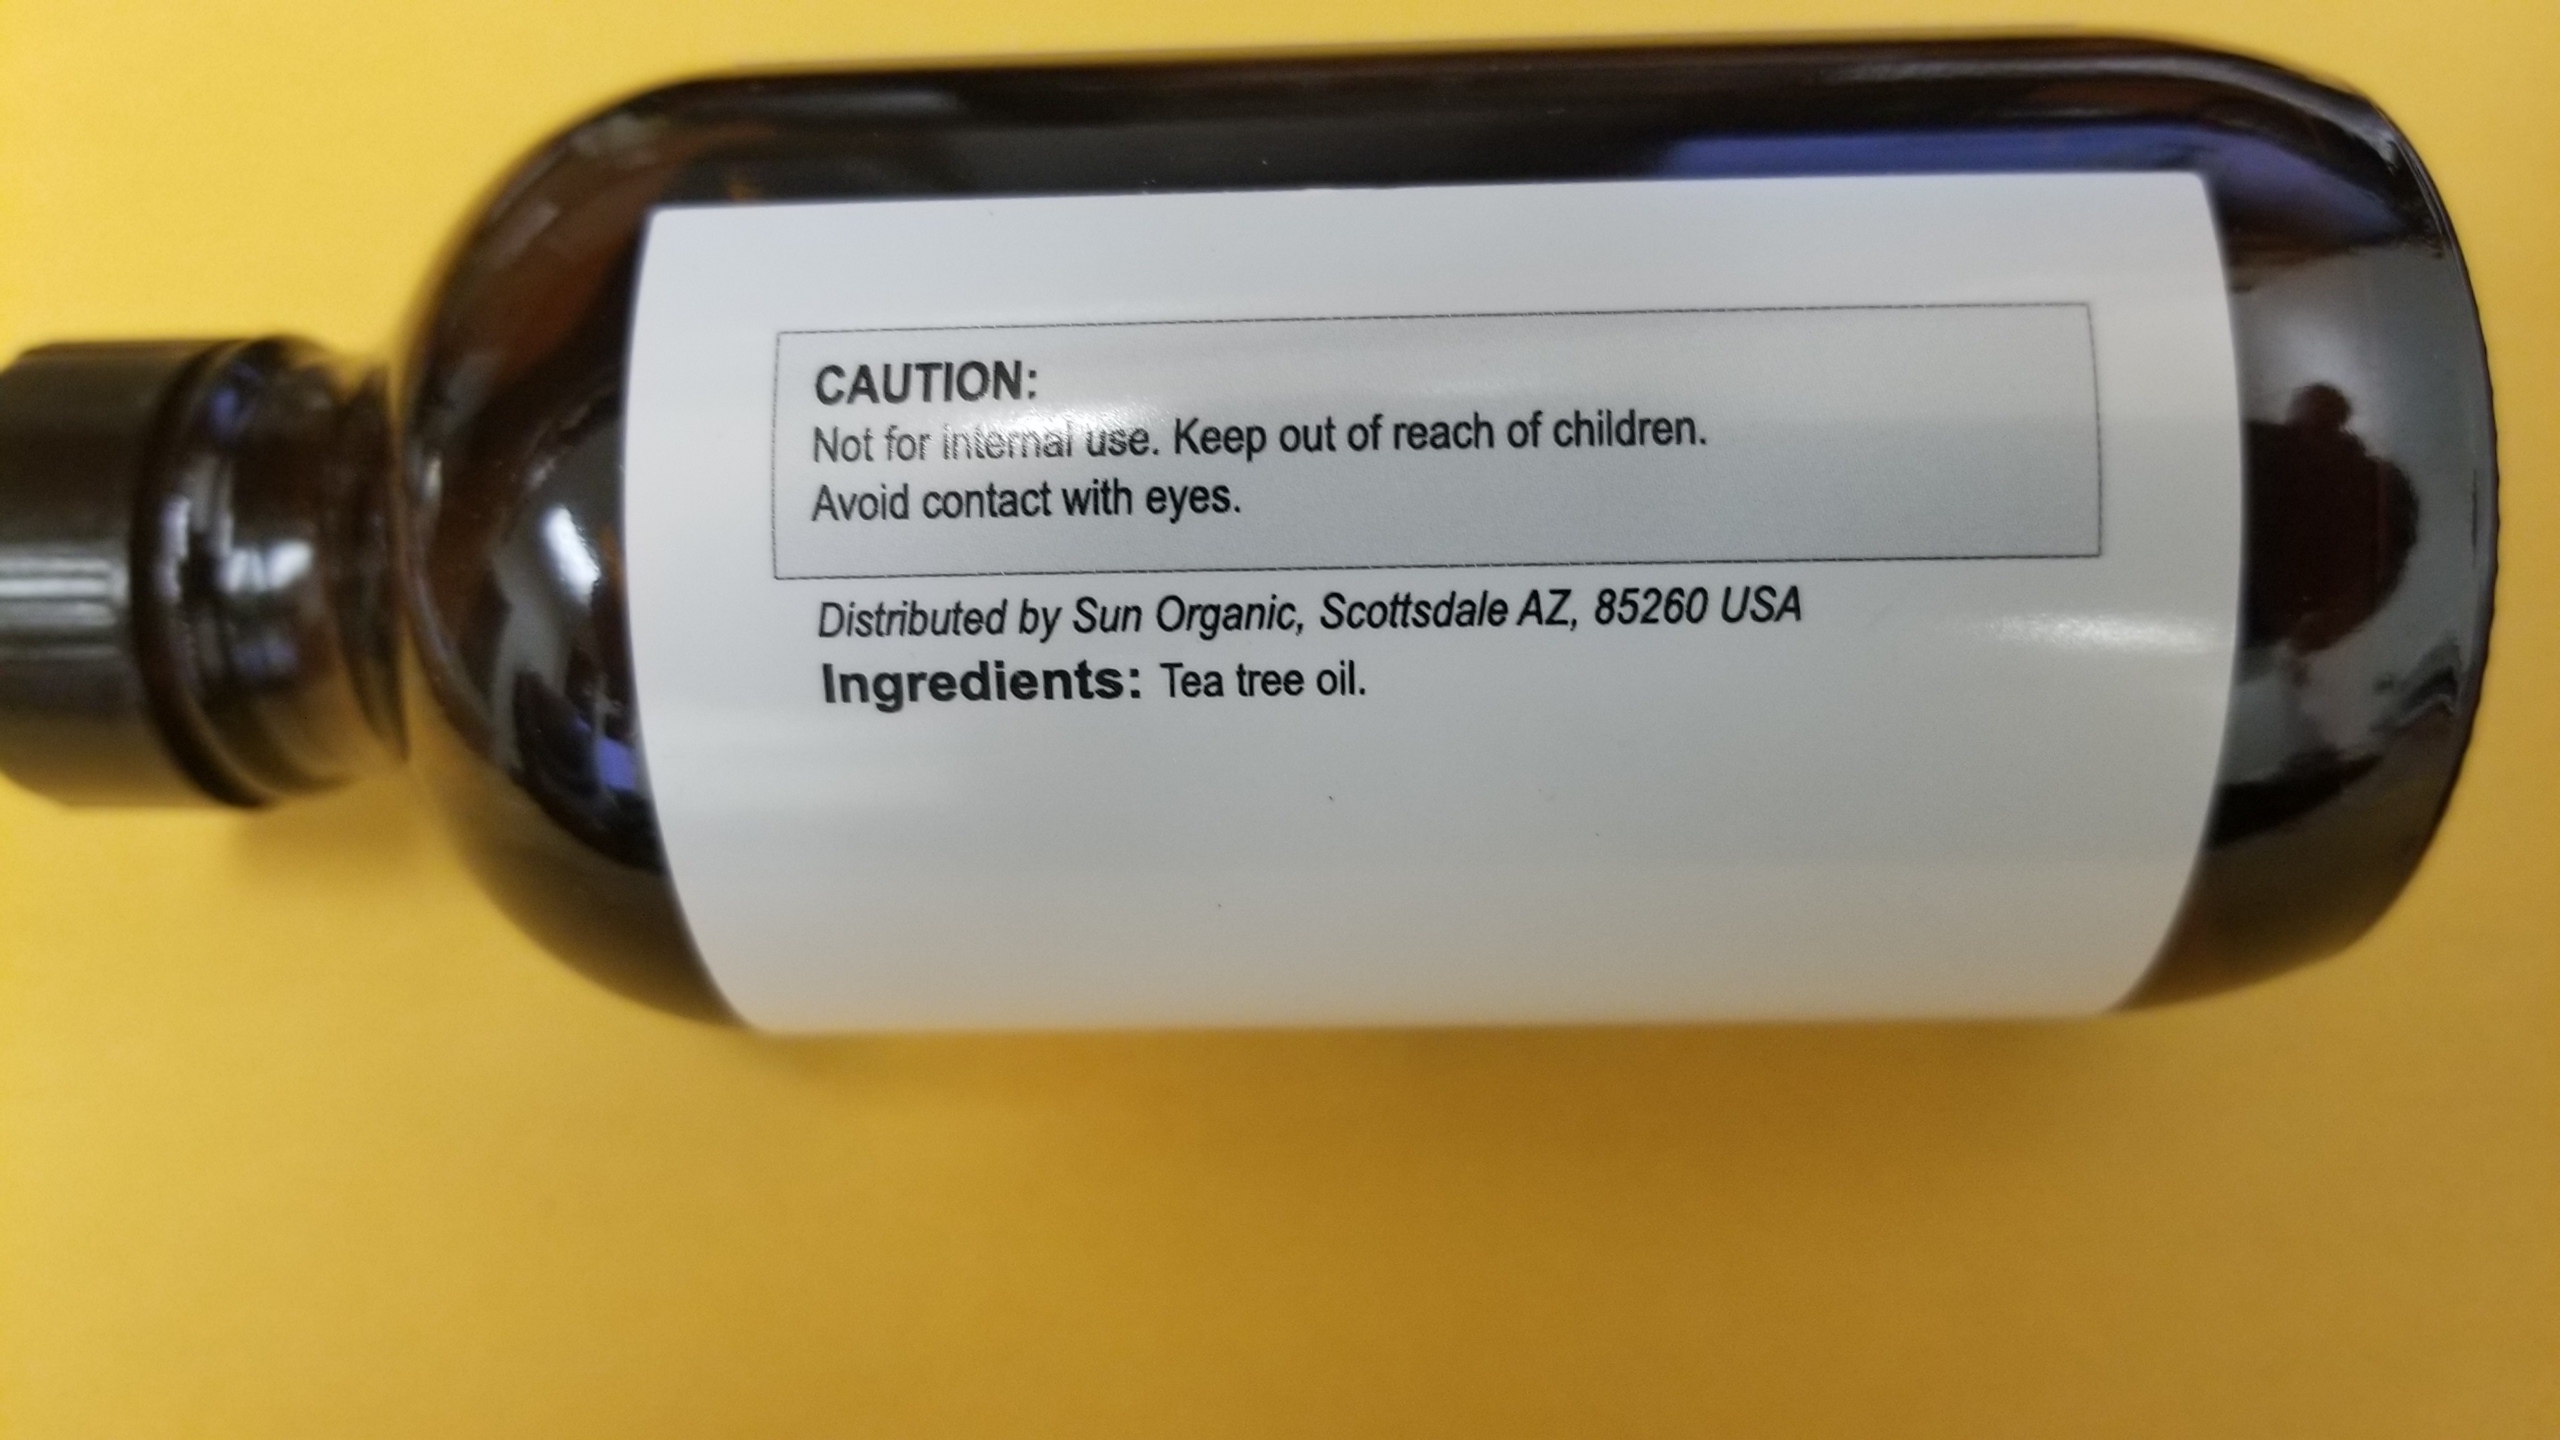 Side panel of label with no contact info 